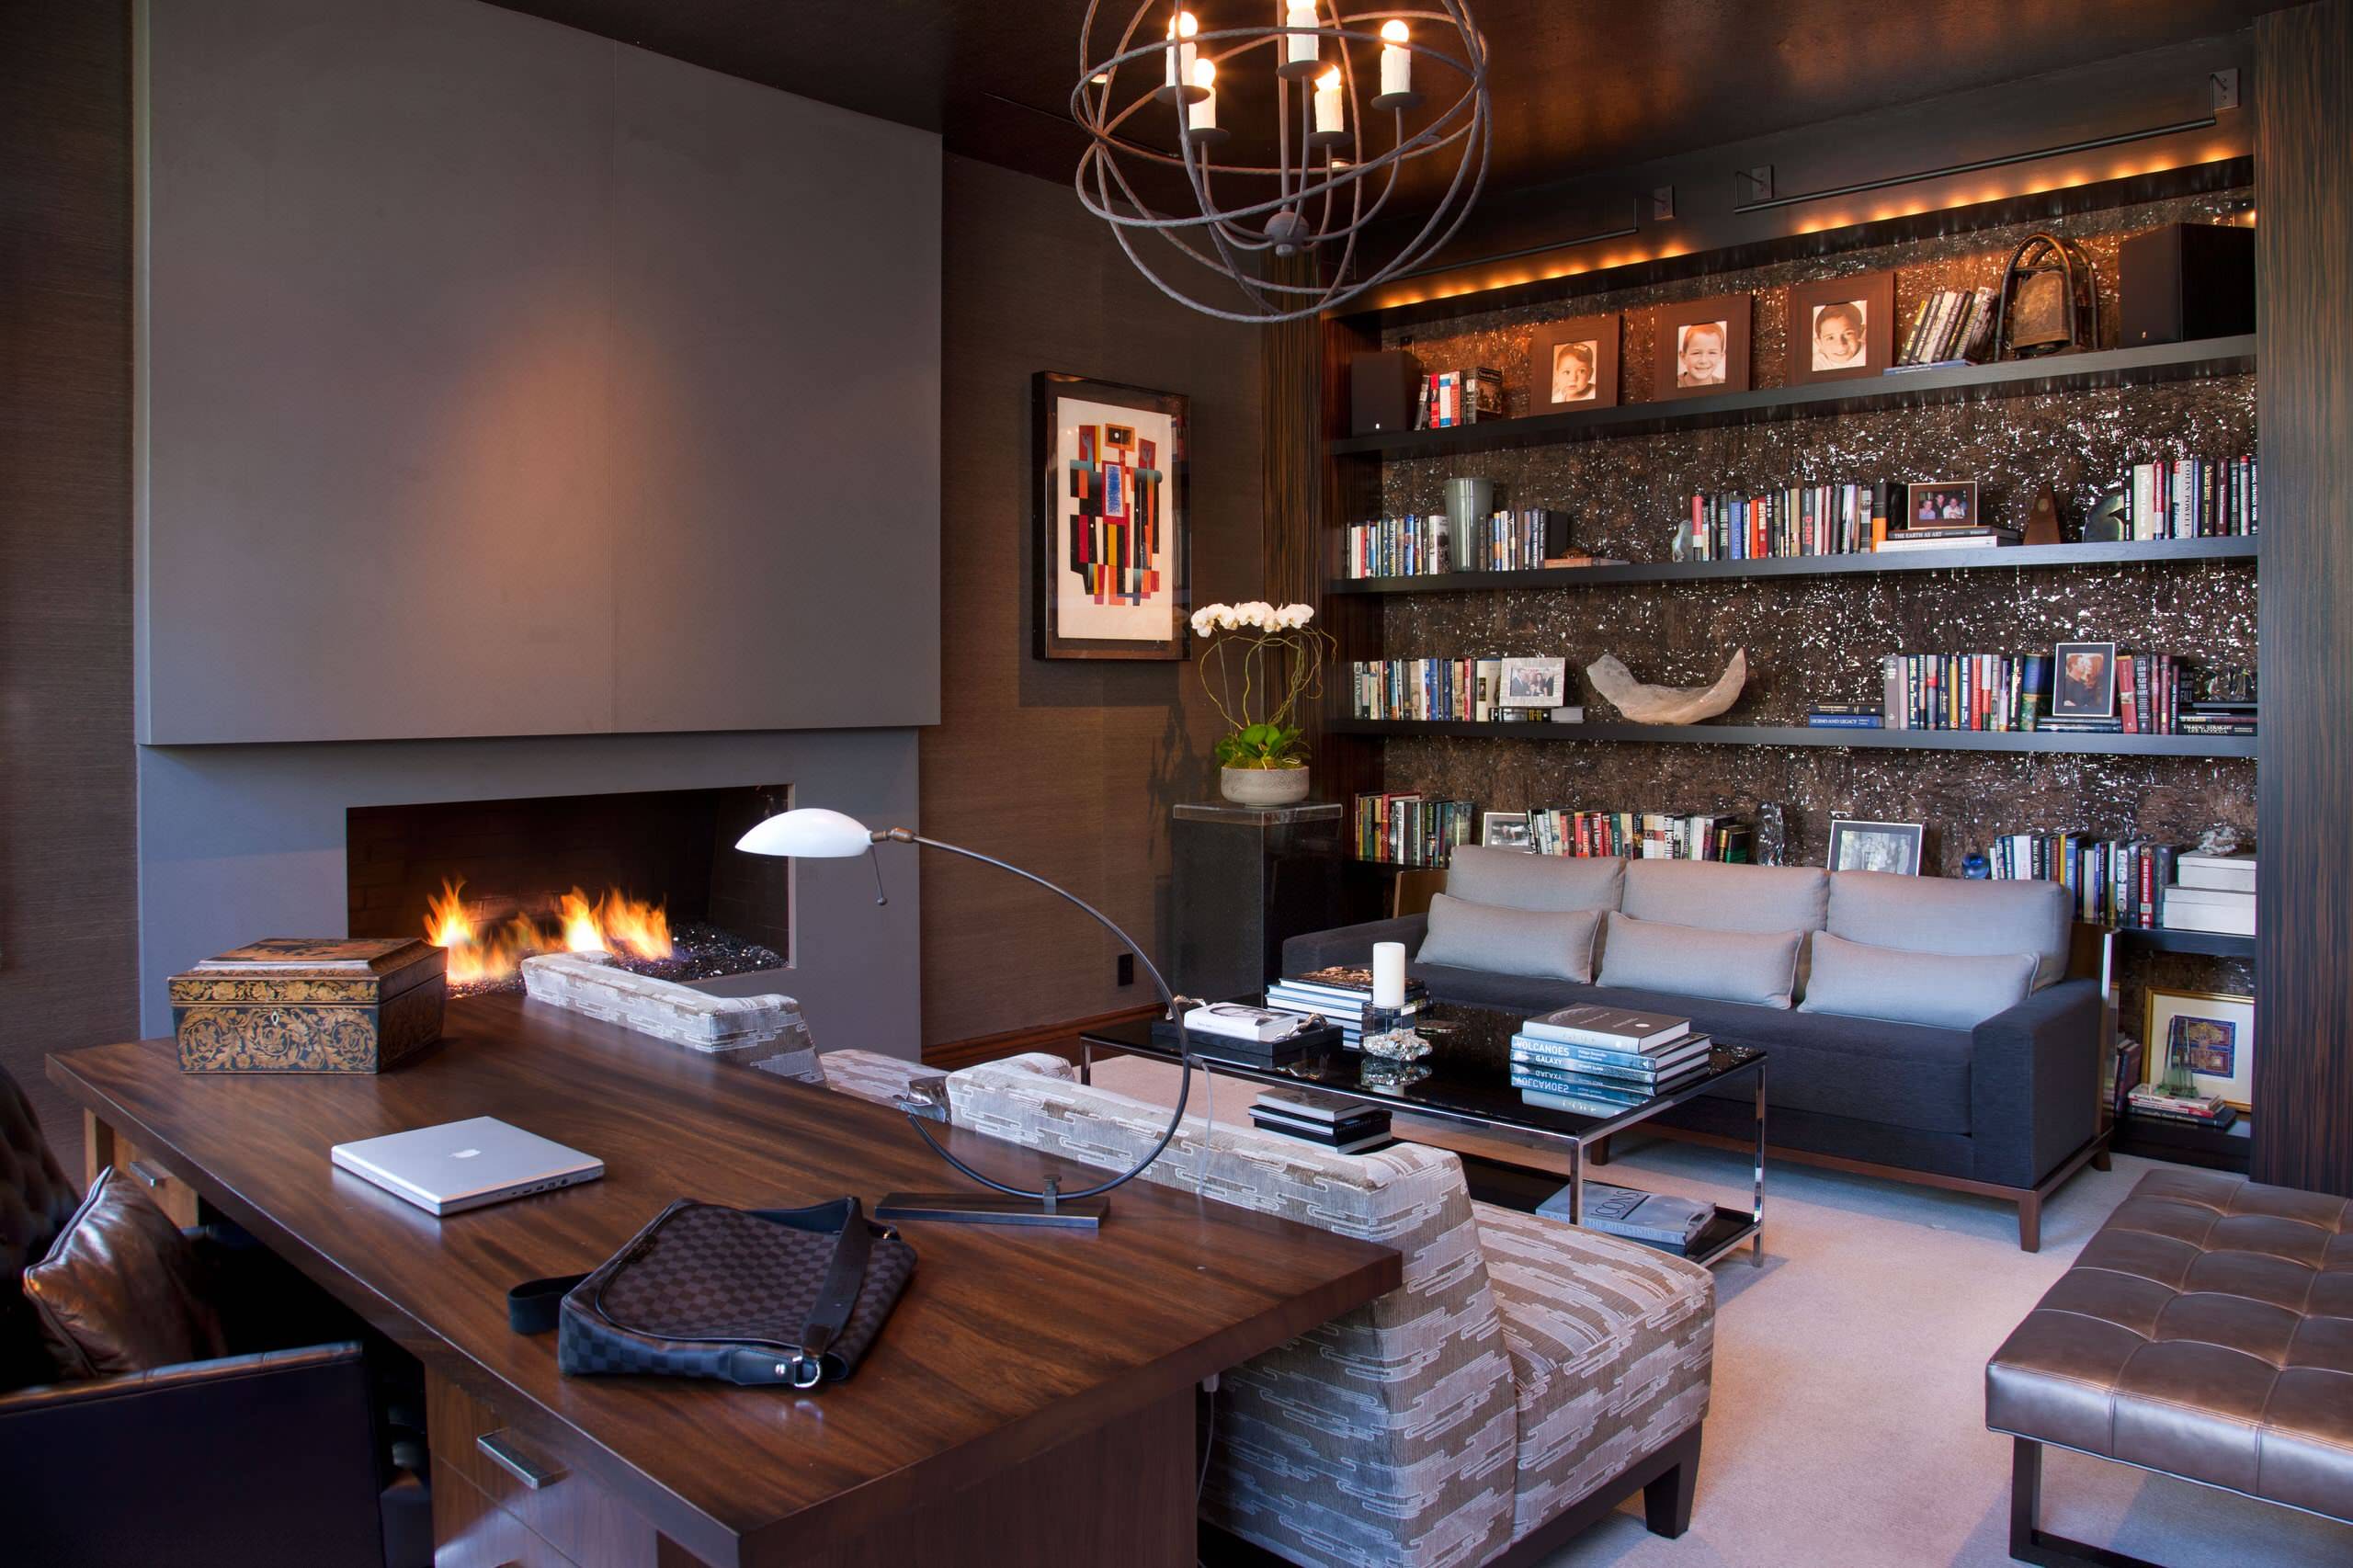 Upscale feel (from Houzz)